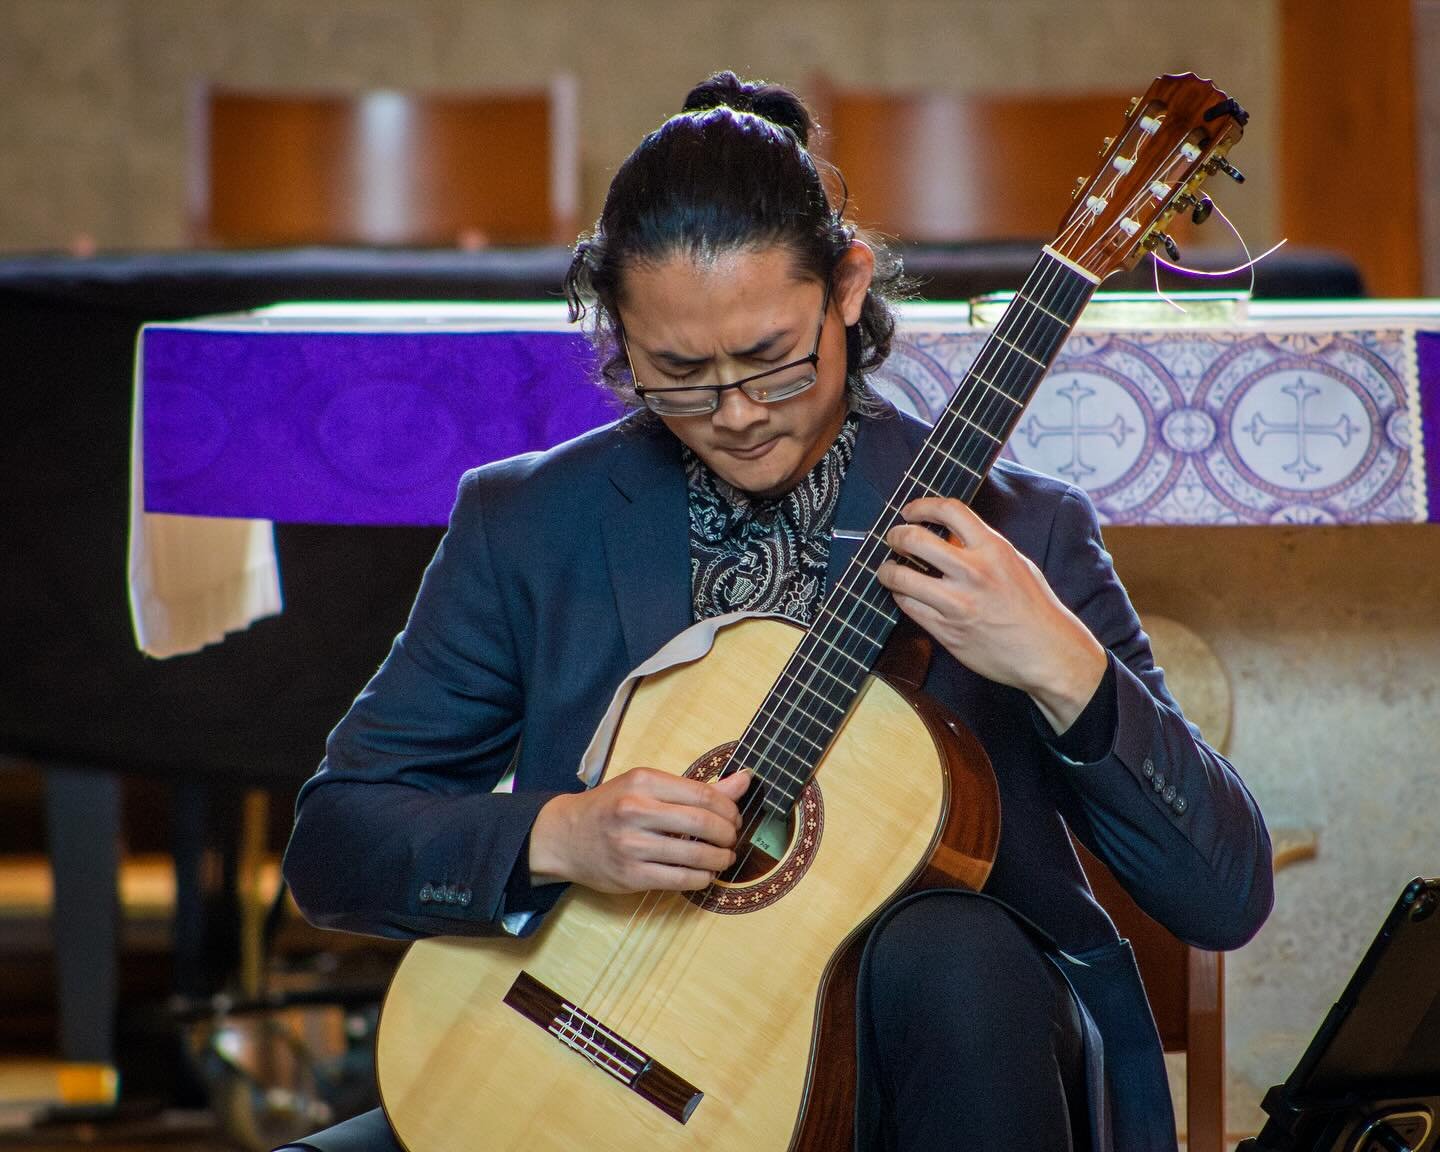 Some pictures from last week&rsquo;s recital with @albertodanielquintanillam at the St. Boniface Episcopal Church 😁🎸 

Thank you to @izzy_fincher for the great pics 📸